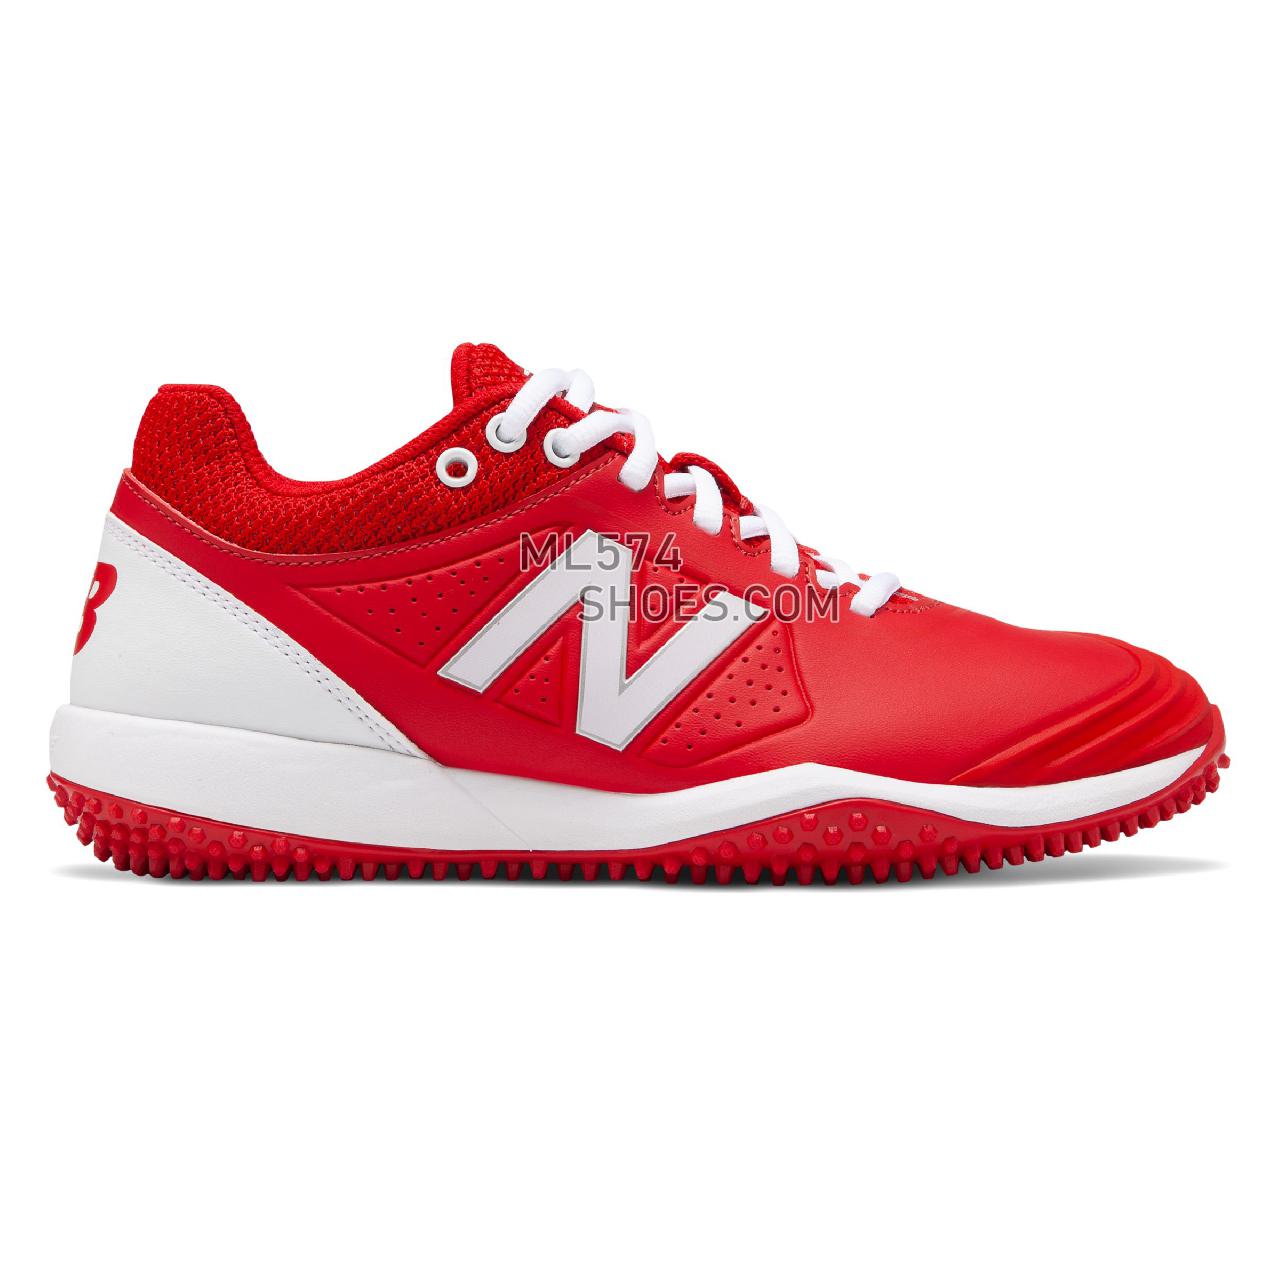 New Balance Fusev2 Turf - Women's Softball - Red with White - STFUSER2